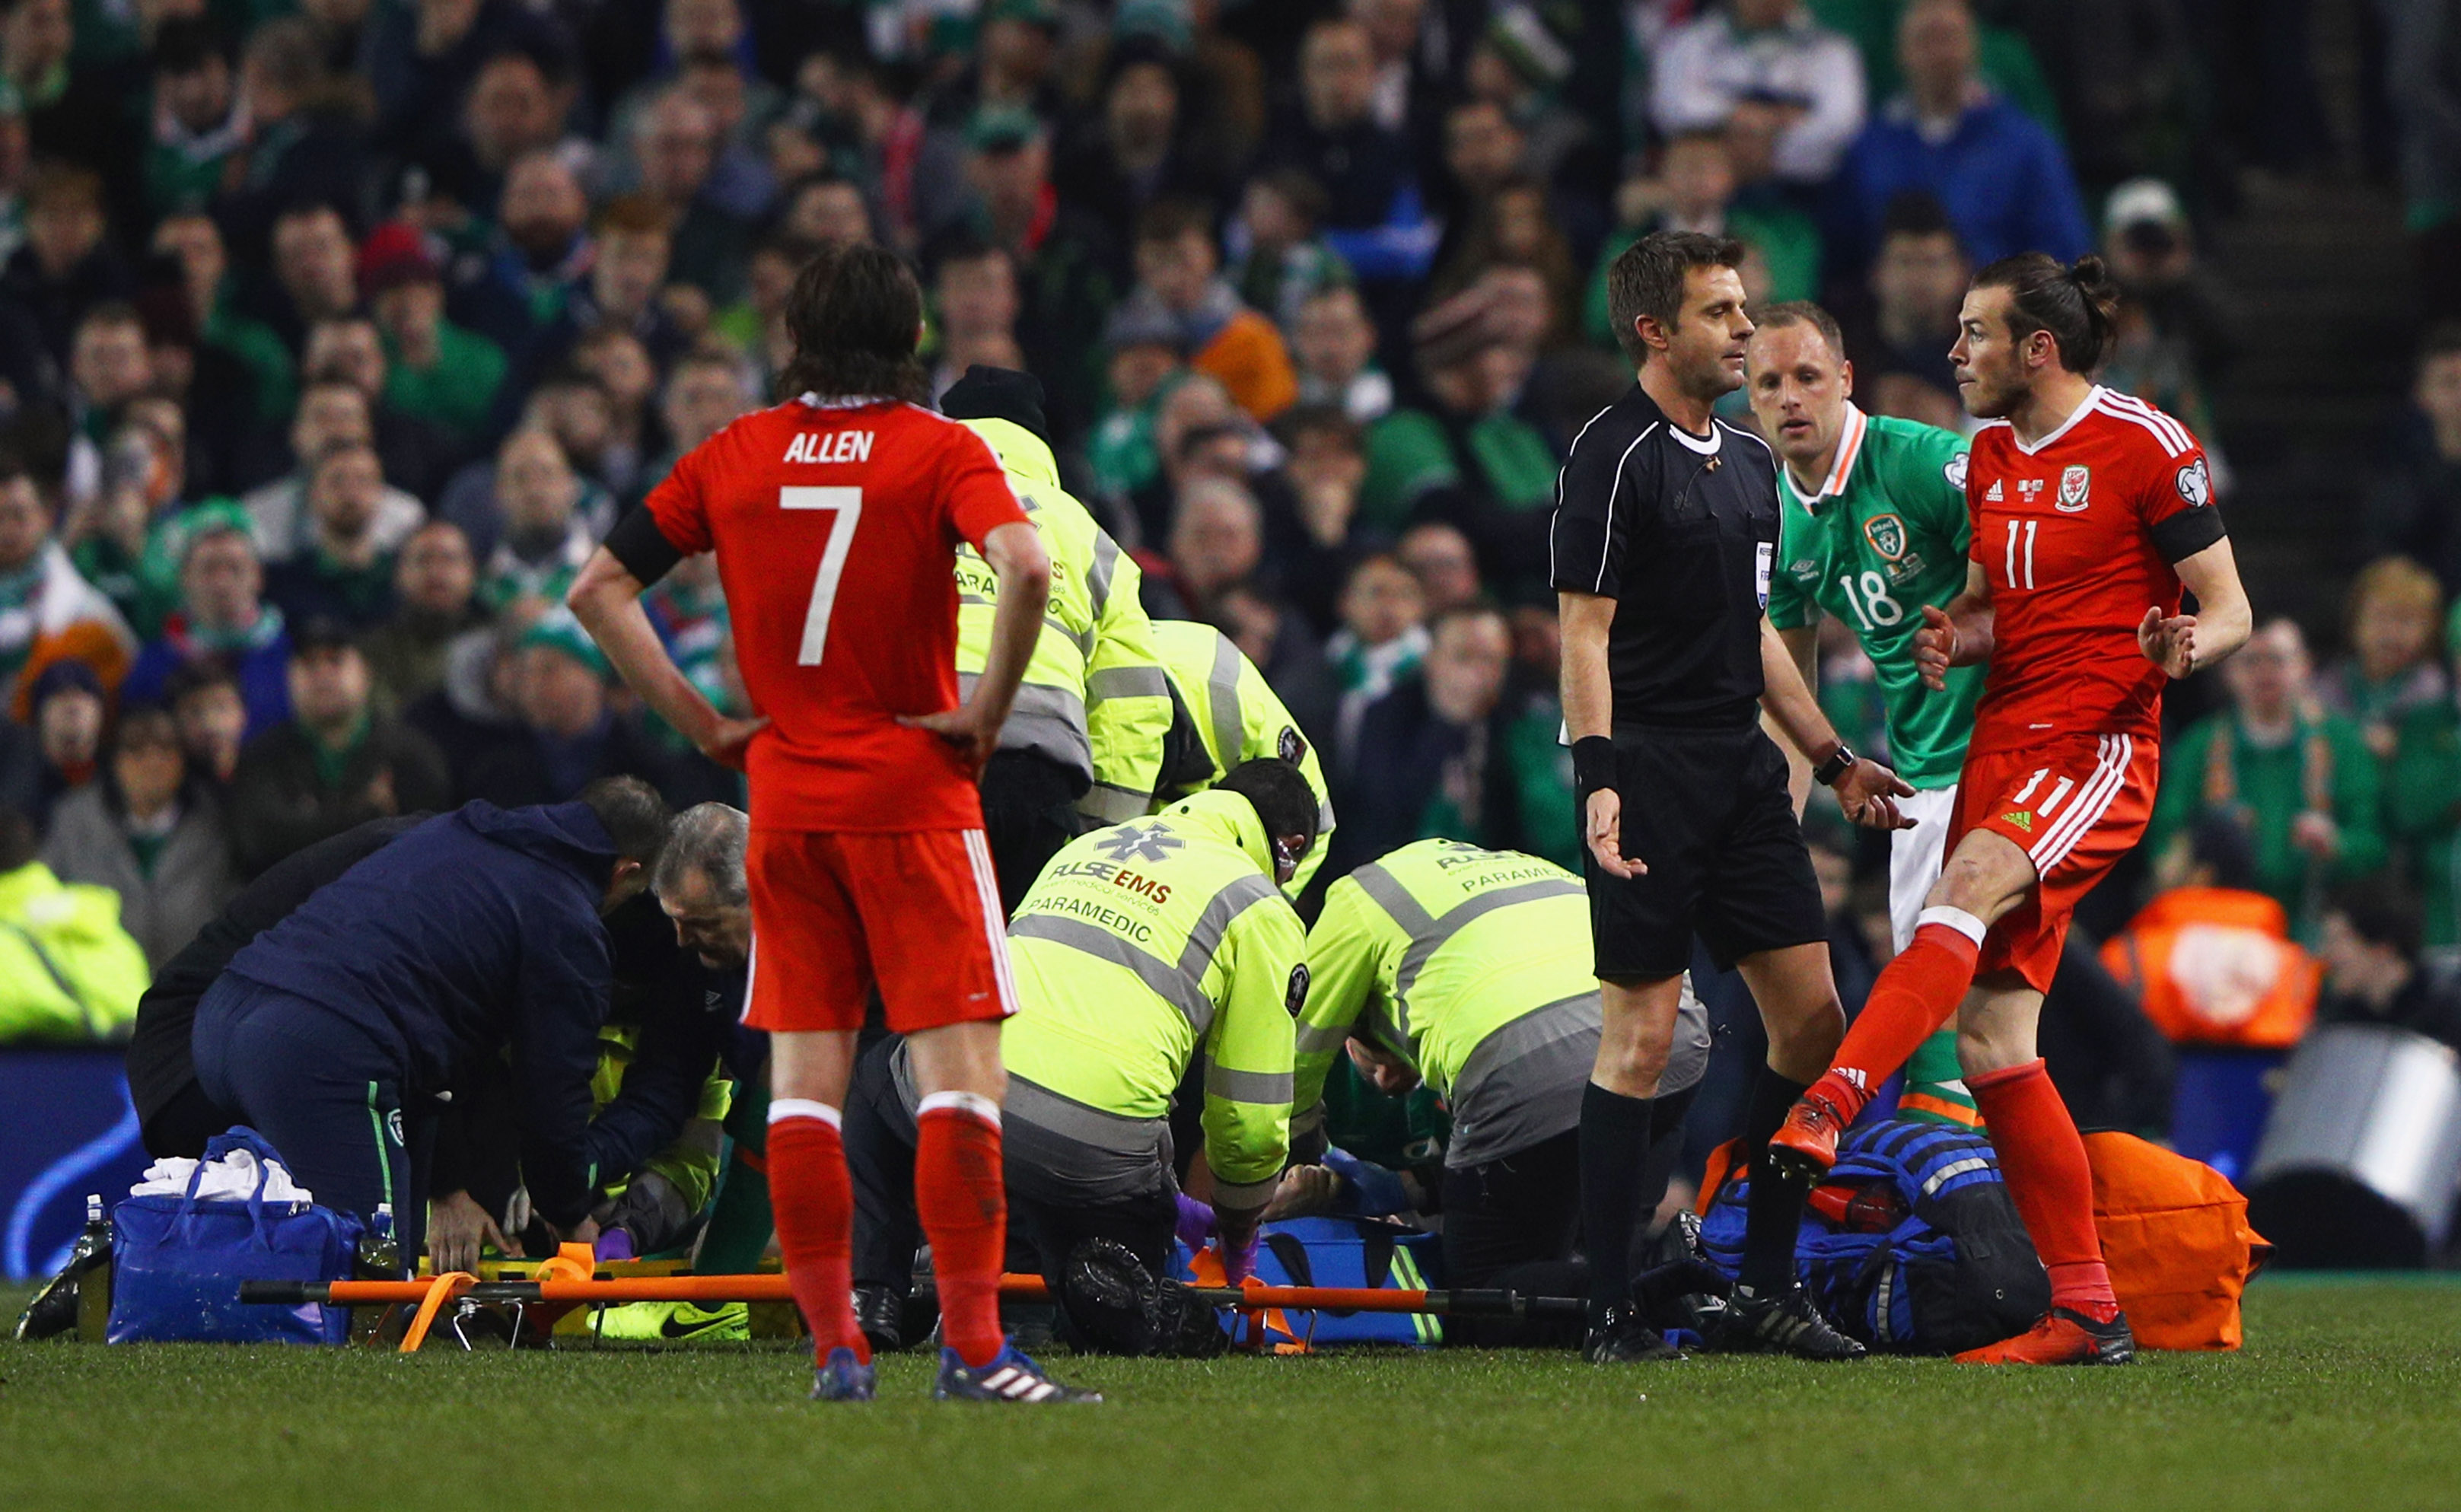 DUBLIN, IRELAND - MARCH 24:  Gareth Bale of Wales (11) reacts towards referee Nicola Rizzoli as an injured Seamus Coleman of the Republic of Ireland is gven treatment during the FIFA 2018 World Cup Qualifier between Republic of Ireland and Wales at Aviva Stadium on March 24, 2017 in Dublin, Ireland.  (Photo by Ian Walton/Getty Images)